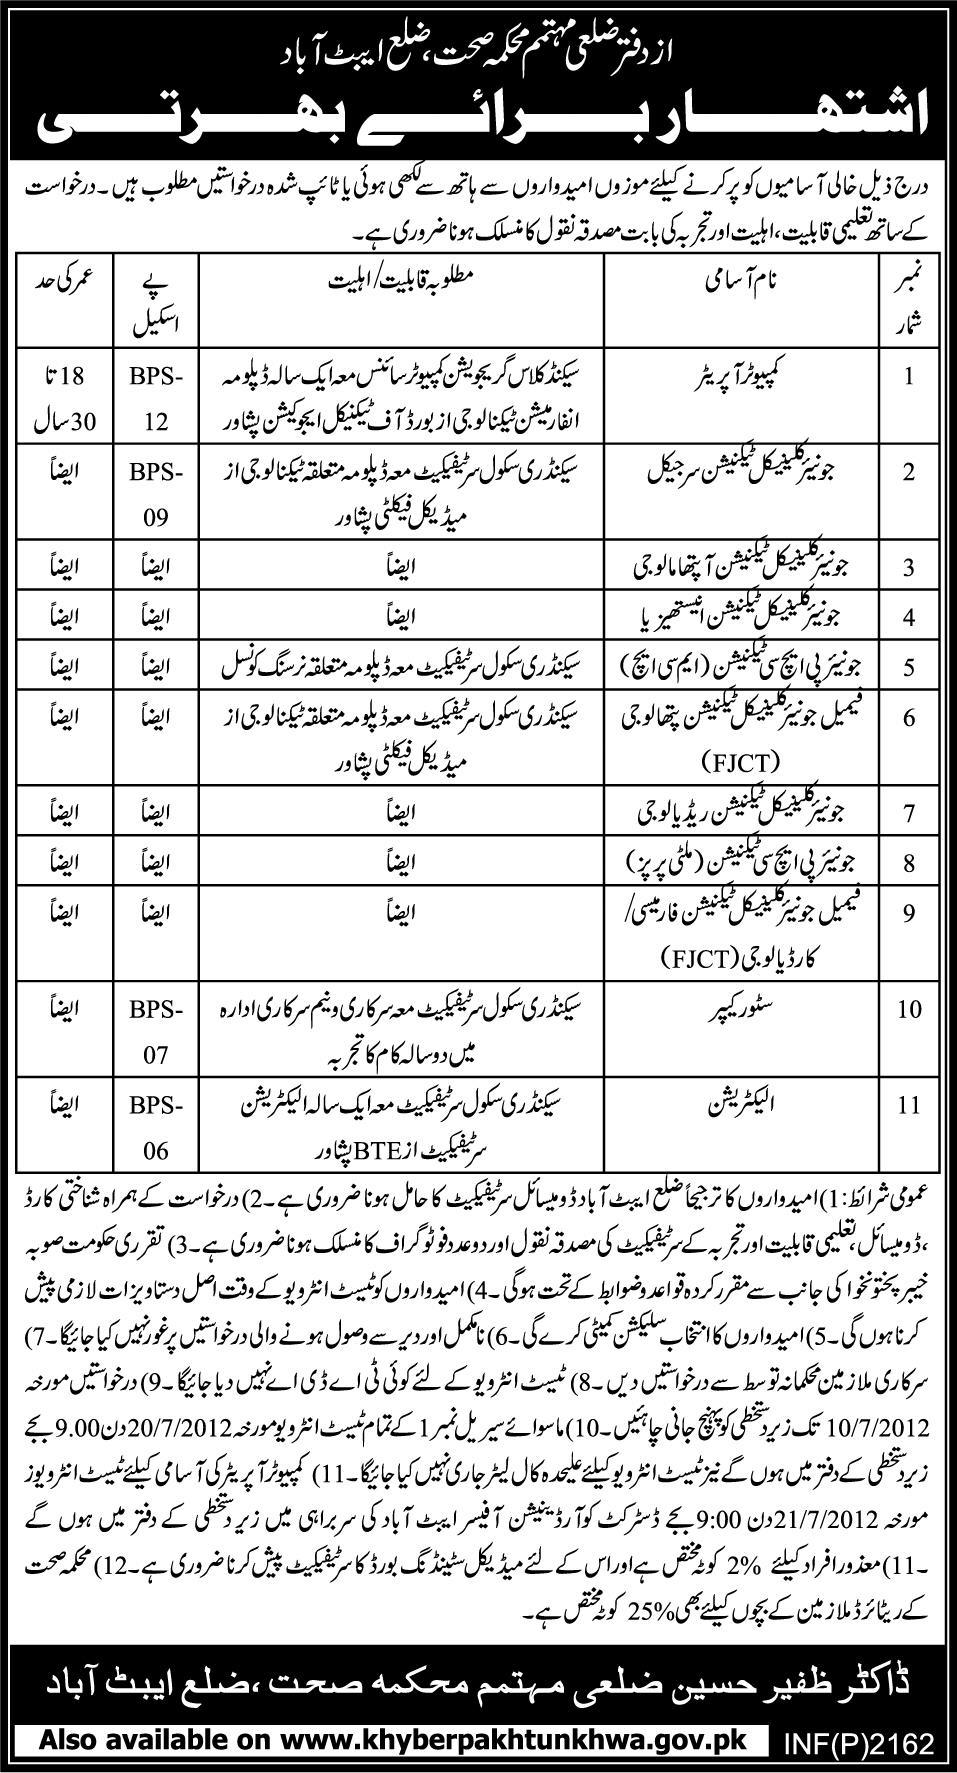 Medical Technicians, Computer Operator and Electrician Jobs by District Health Department KPK (Govt. job)